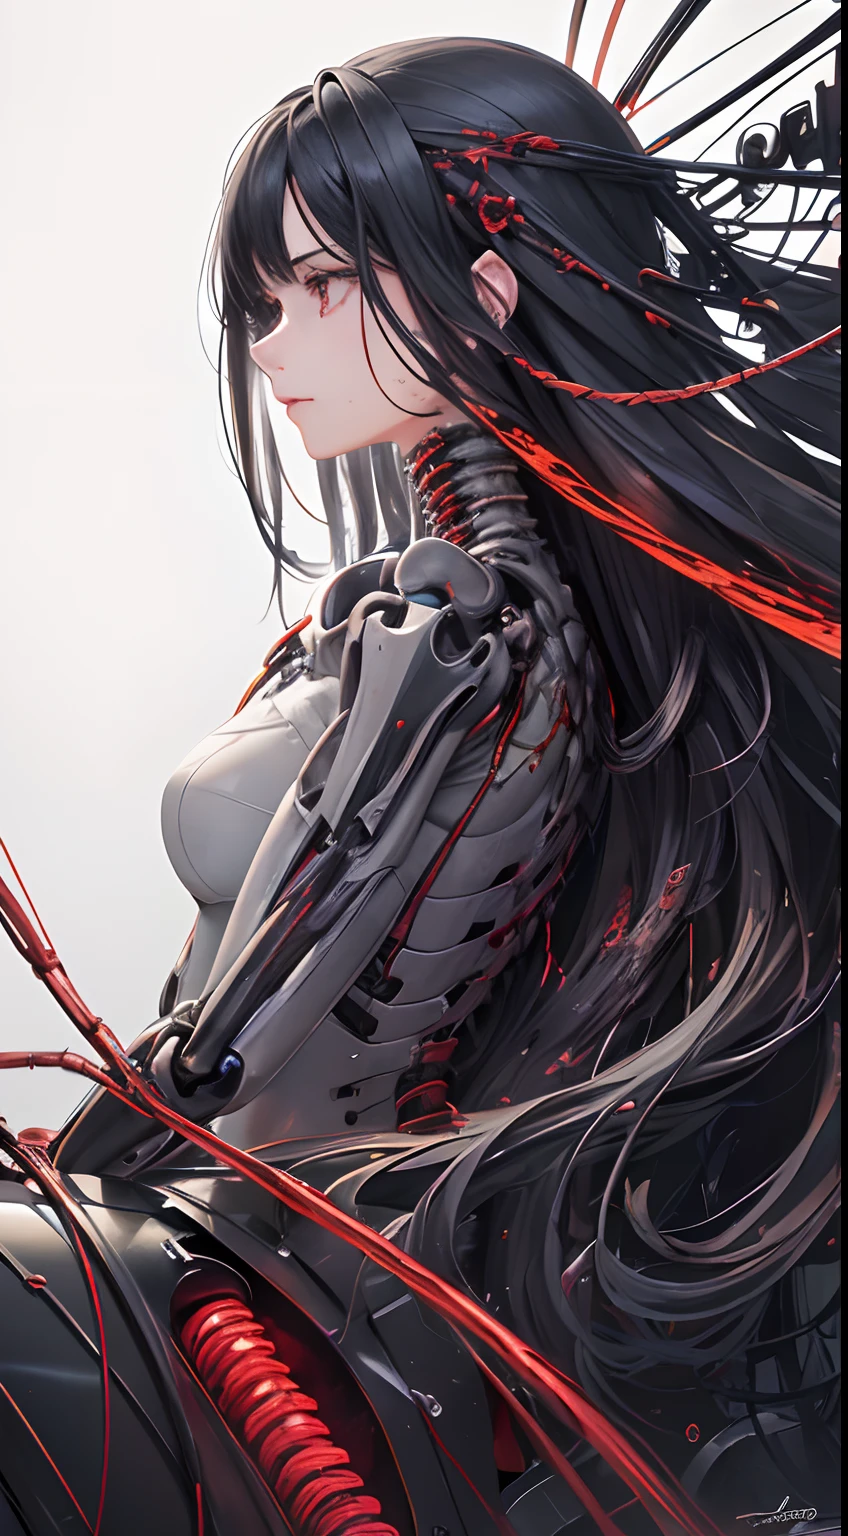 masterpiece, top quality, best quality, official art, beautiful and aesthetic:1.2), (1girl:1.4), (very long flowing black hair) extreme detail, full color, supreme detail ((very detailed)), (very CG illustration detailed), ((very detailed) delicate and beautiful)),(from the side),cinematic light,((1 mechanical girl)),solo,whole body,(machine-made joints: 1.2),((machine-made limbs) ),(blood vessels connected to tubes ),(mechanical spine attached to the back),(bones sticking out)((mechanical spine attached to the neck)),(sitting),no expression,(wires and cables sticking to the neck: 1.2),(wires and cables in head :1.2)(character focus),science fiction,black background,(blood:1.5)